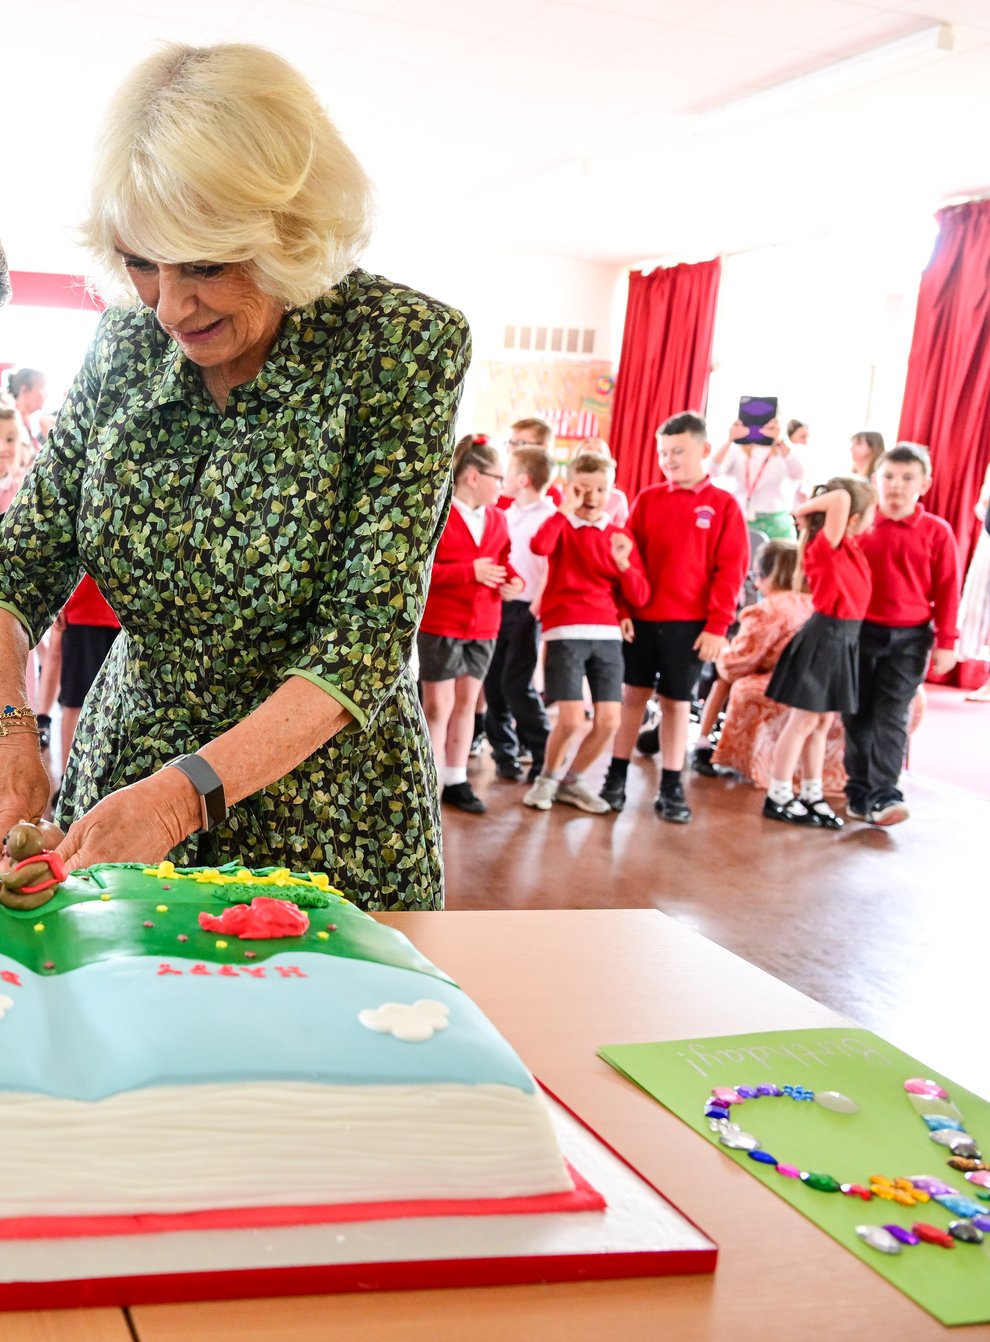 The Duchess of Cornwall, patron of the National Literacy Trust, cuts a birthday cake presented to her during her visit to Millbrook Primary School to officially open the new library (Finbarr Webster/PA)